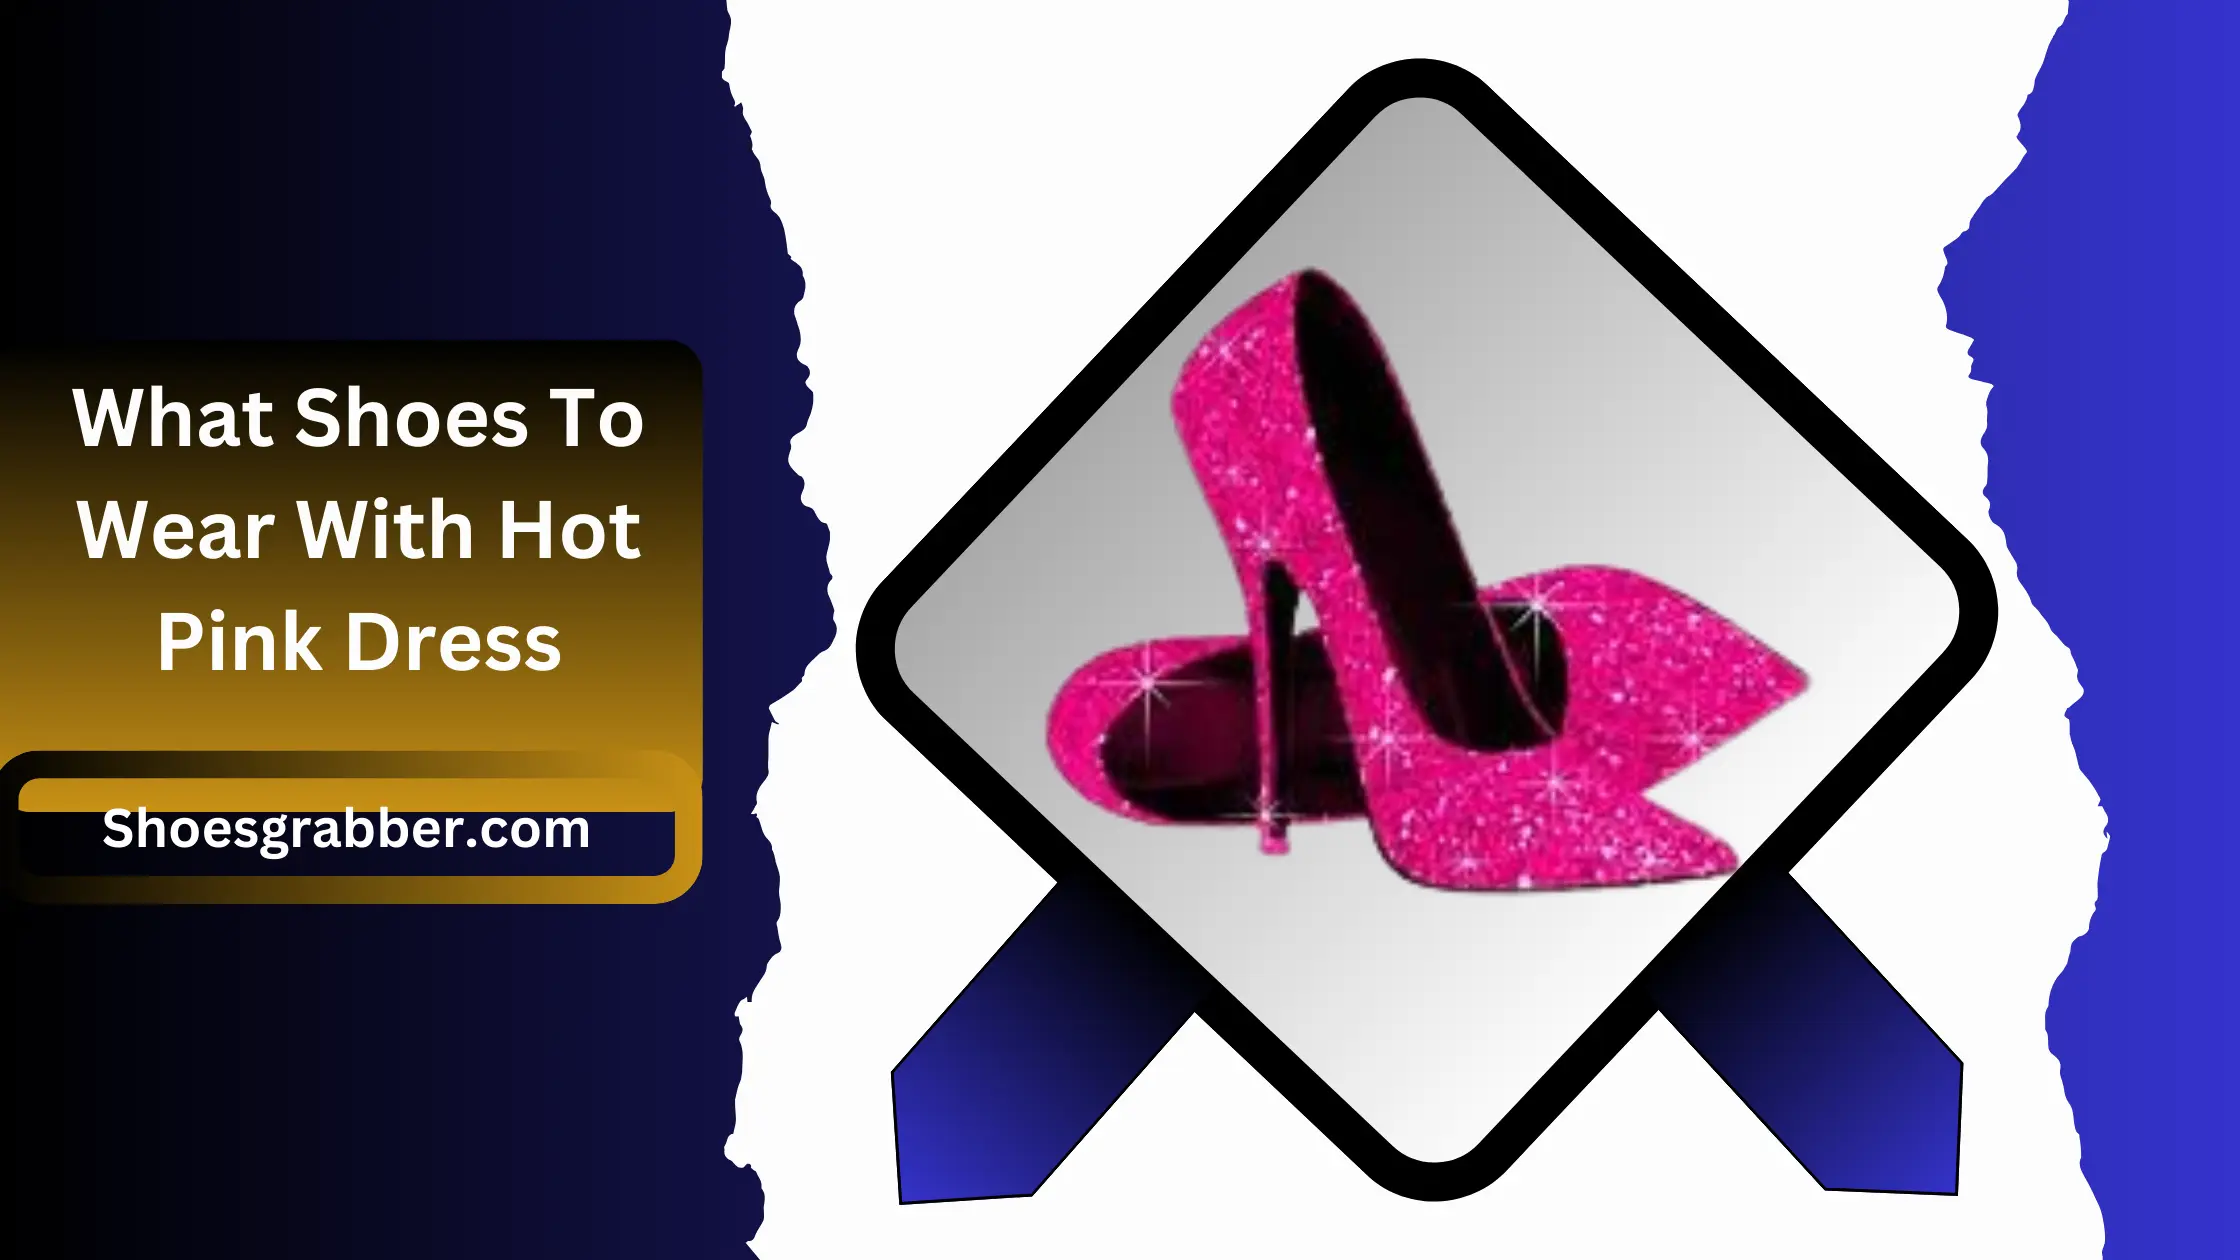 What Shoes To Wear With Hot Pink Dress? Show Off Your Style